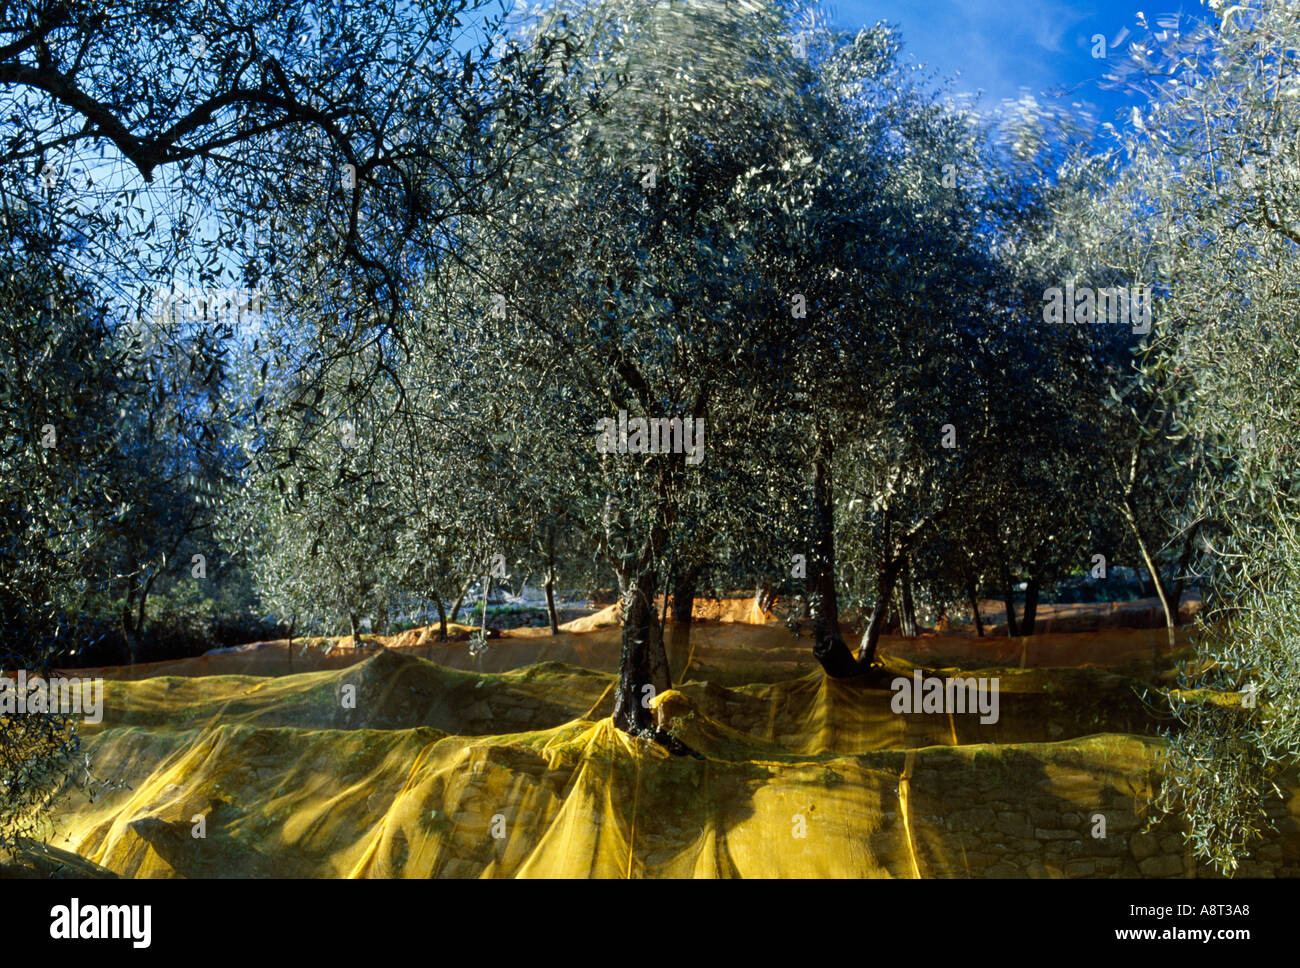 Olive harvesting nets under the trees to catch the olives when they fall  Impéria Ligúria Italy Stock Photo - Alamy